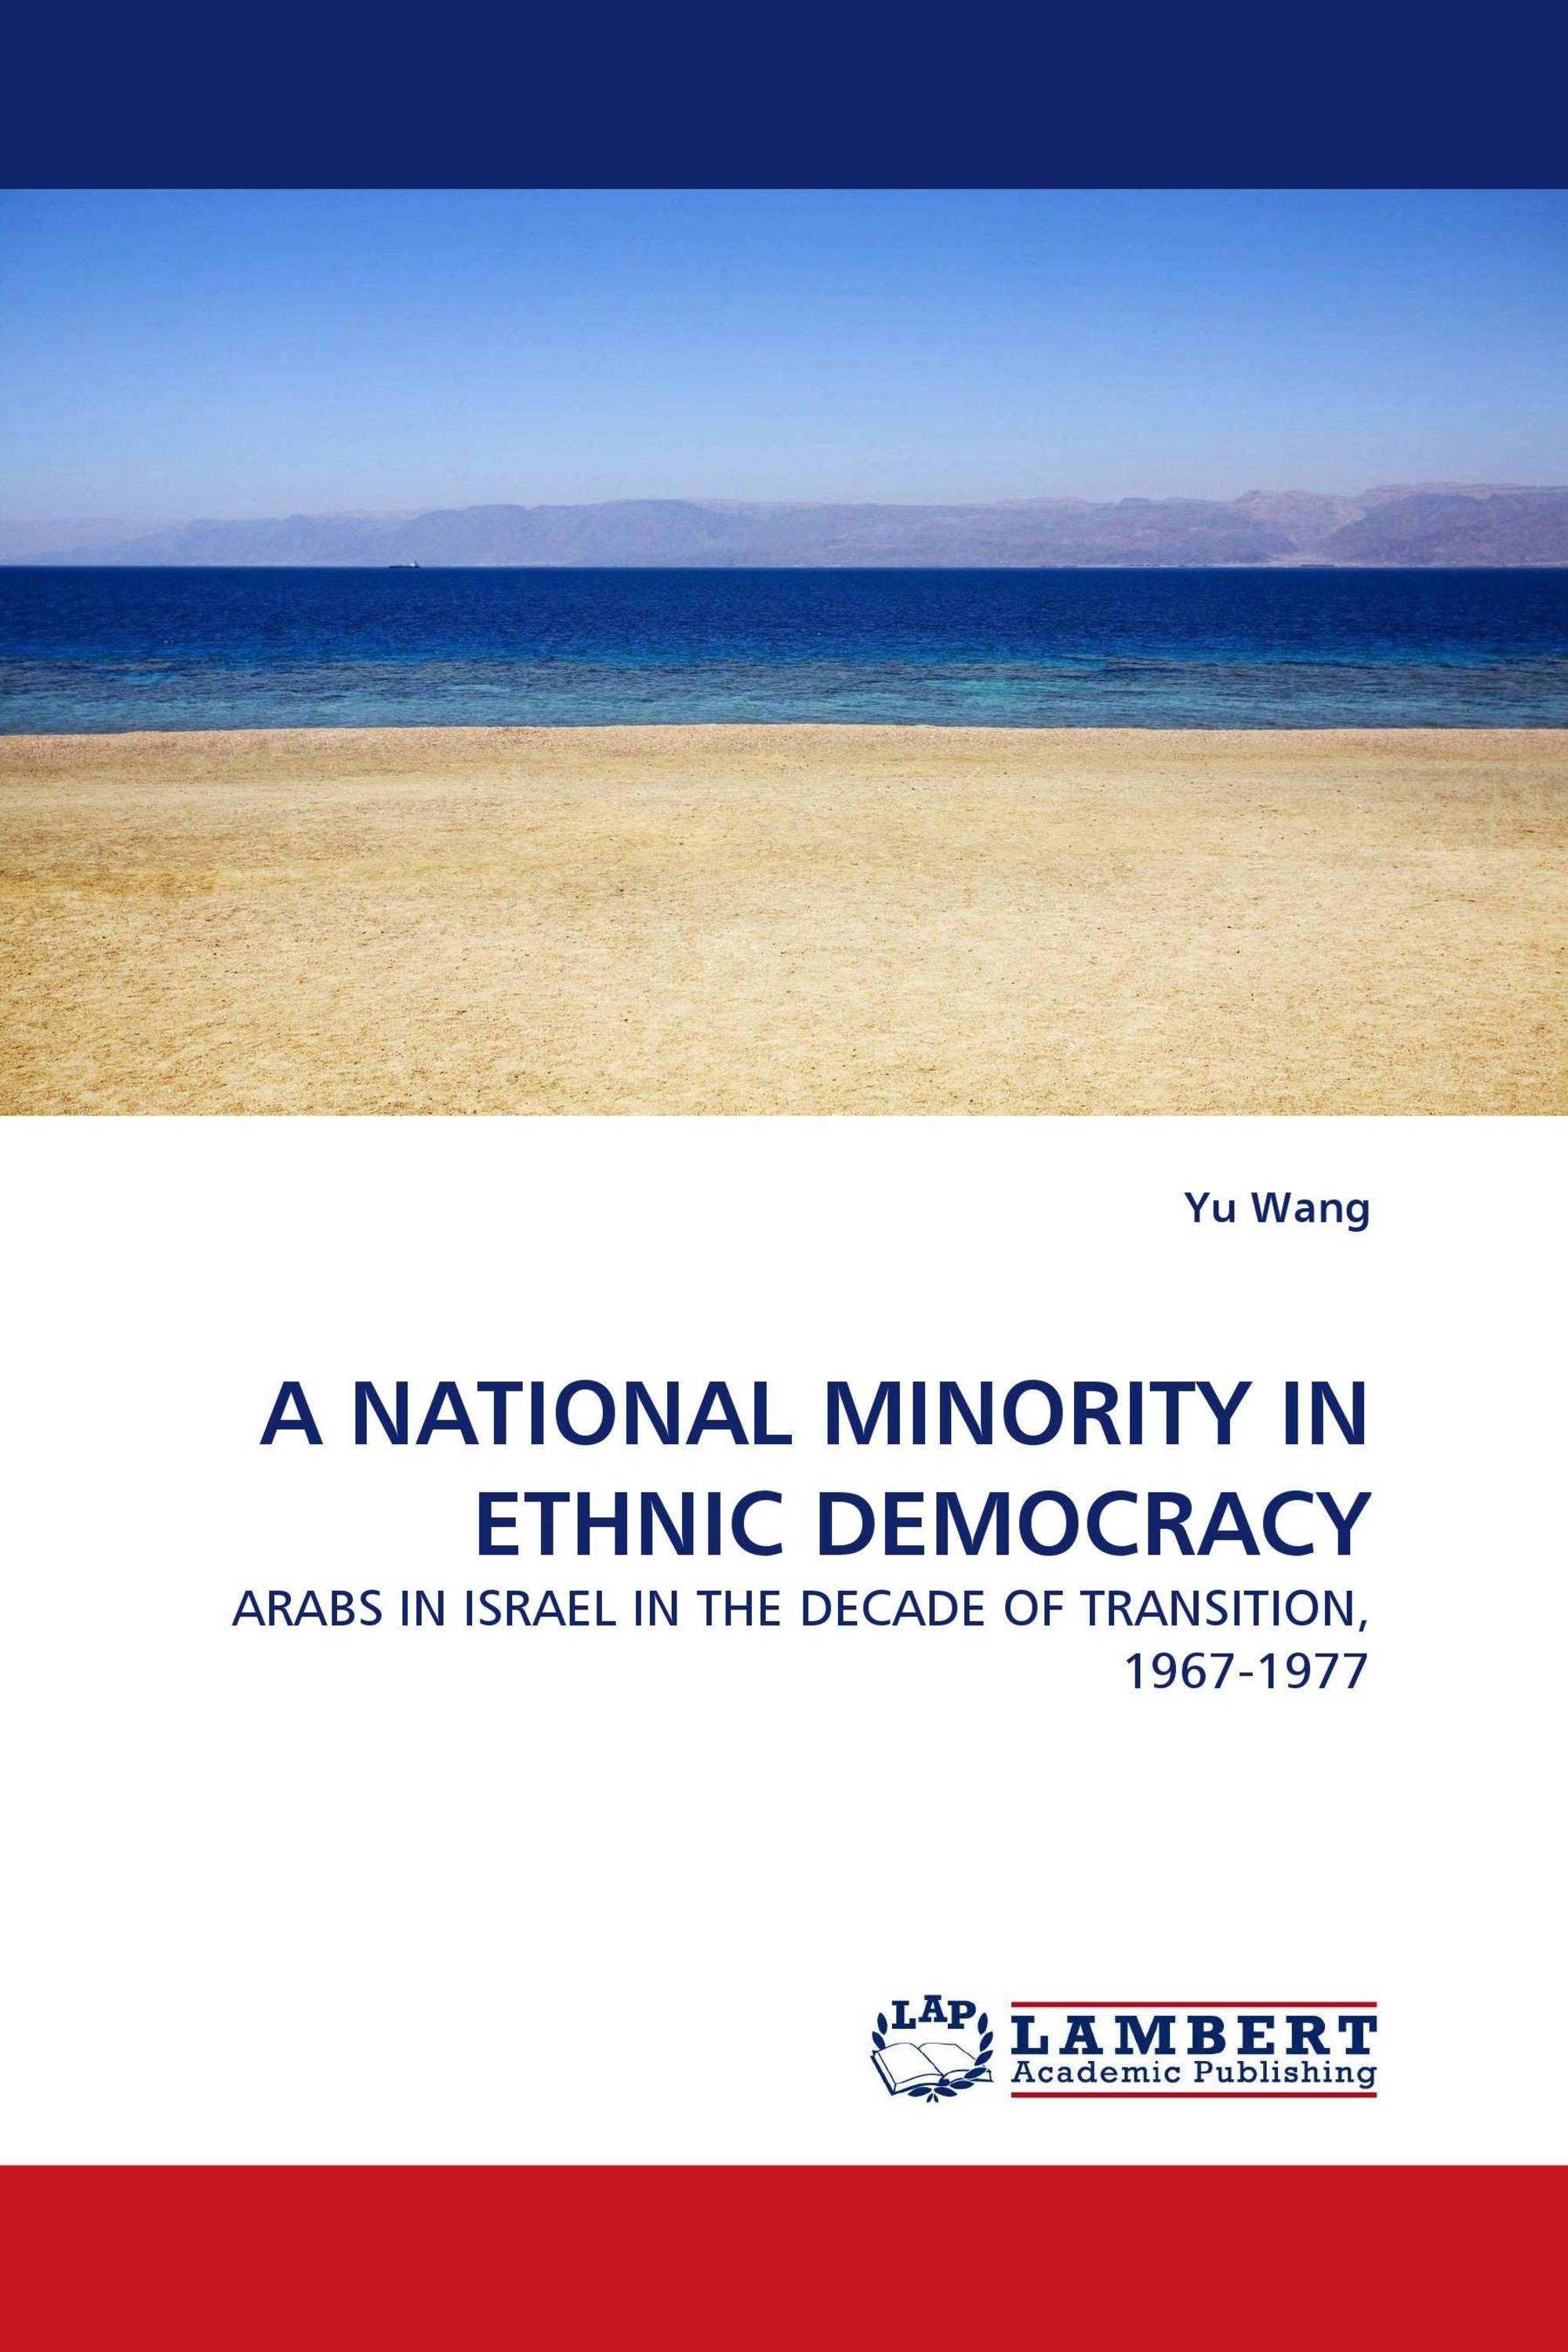 A NATIONAL MINORITY IN ETHNIC DEMOCRACY